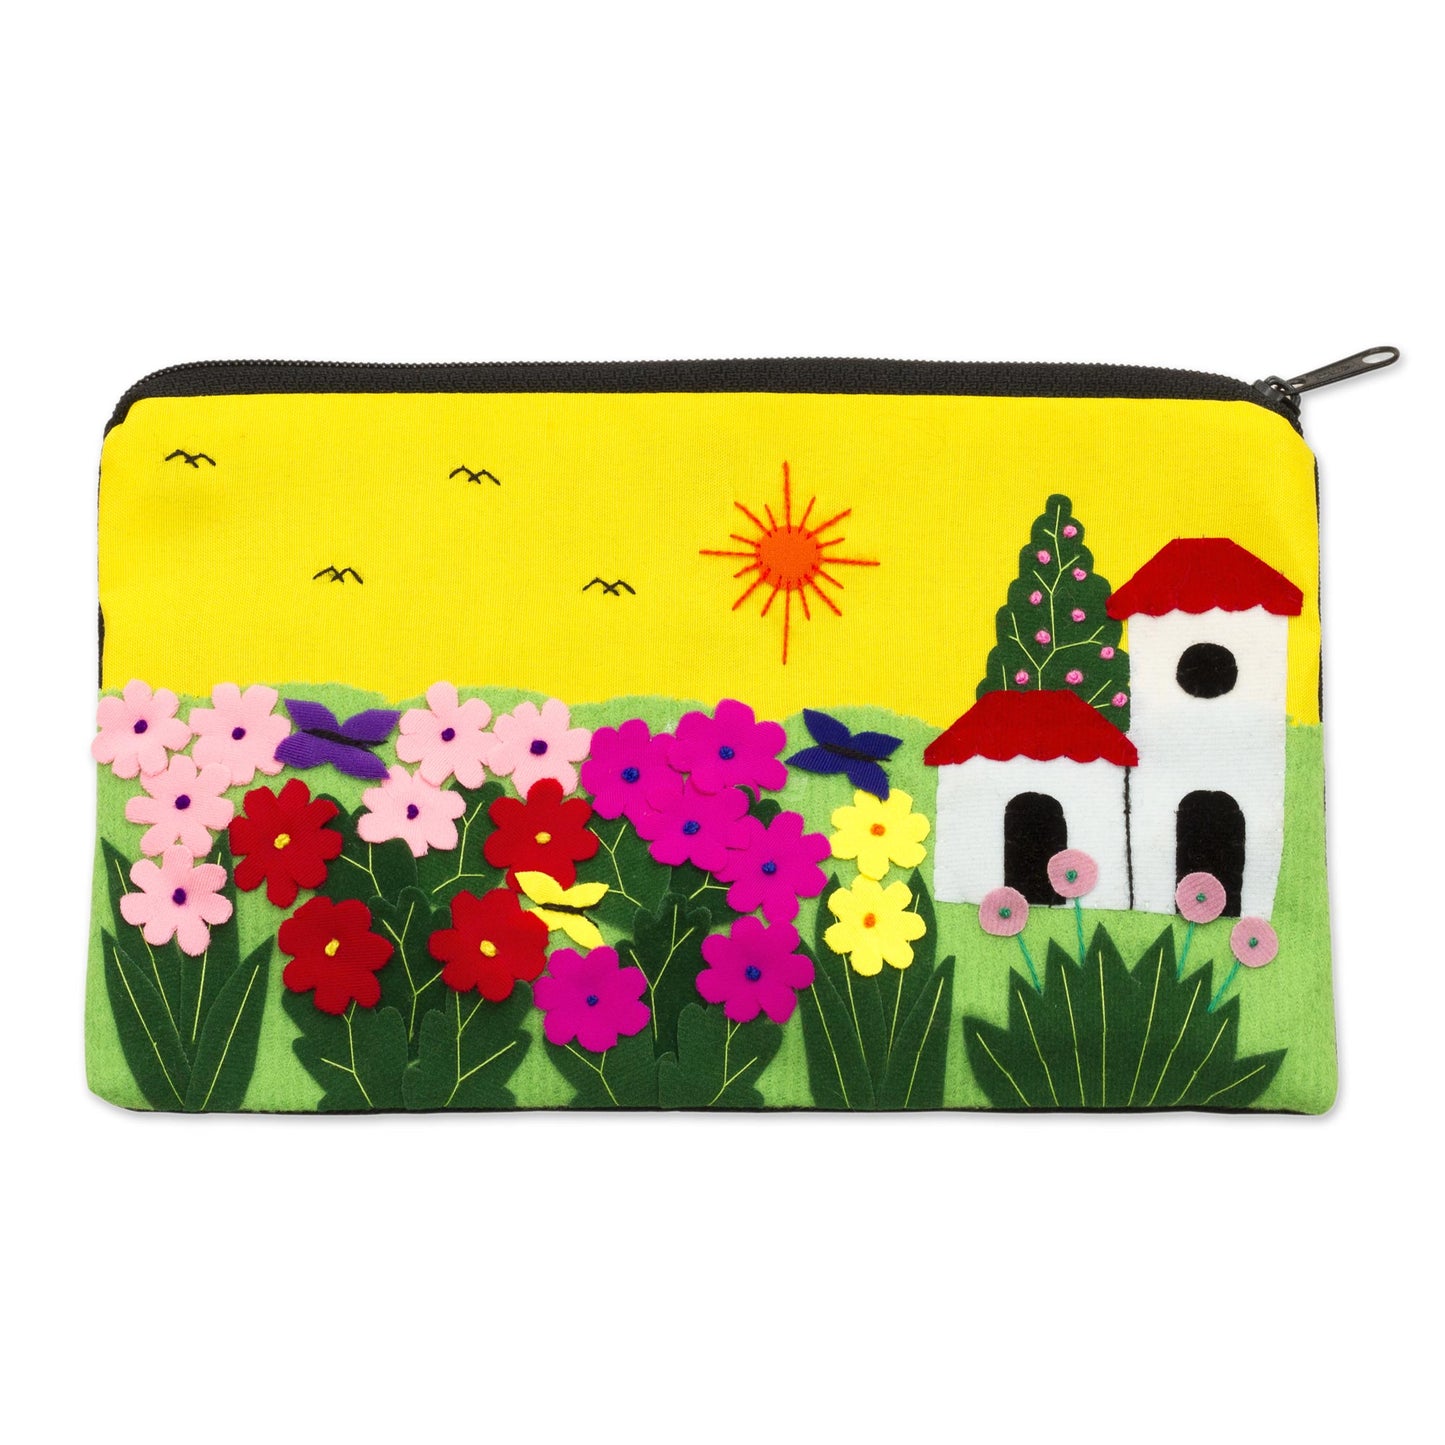 Sunny Afternoon Andean Folk Art Cotton Applique Cosmetic Case